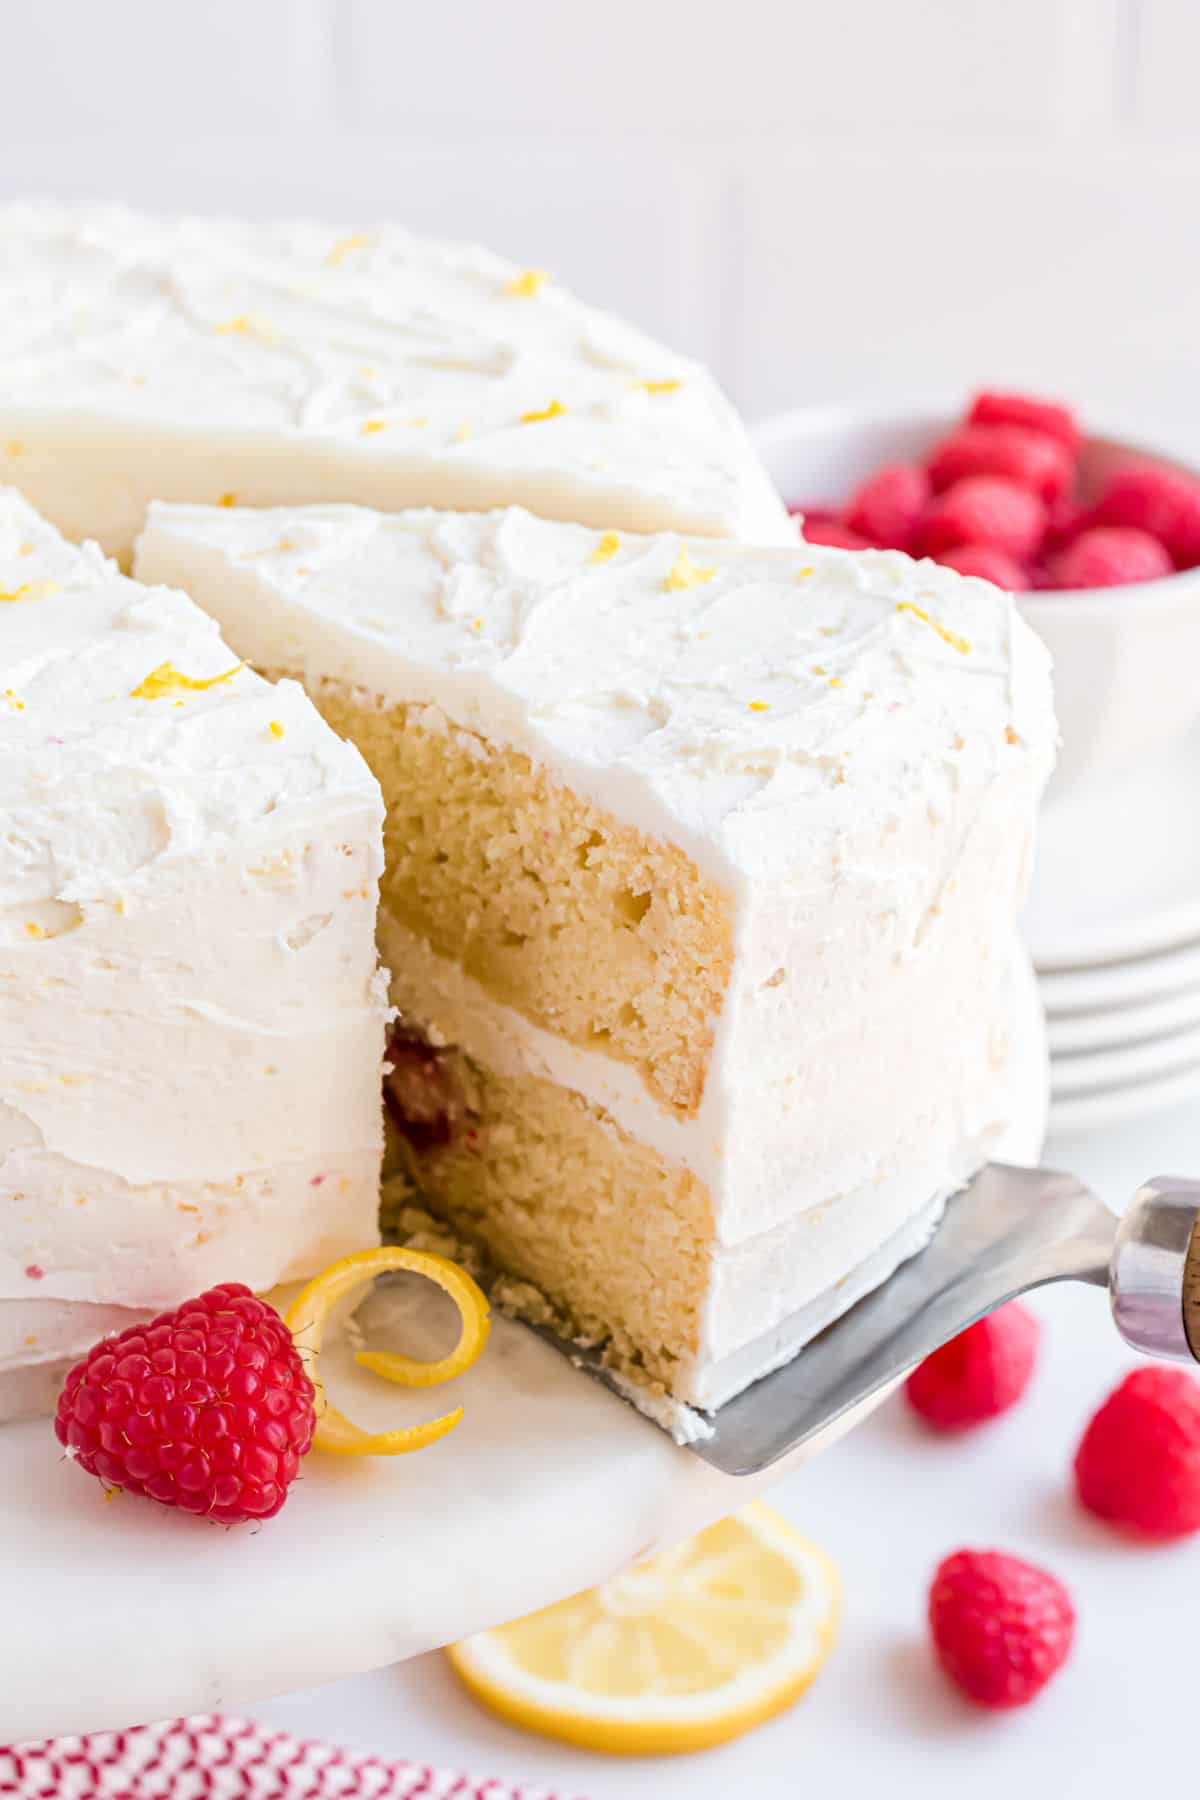 Raspberry lemon layer cake with a cut slice being removed from cake platter.